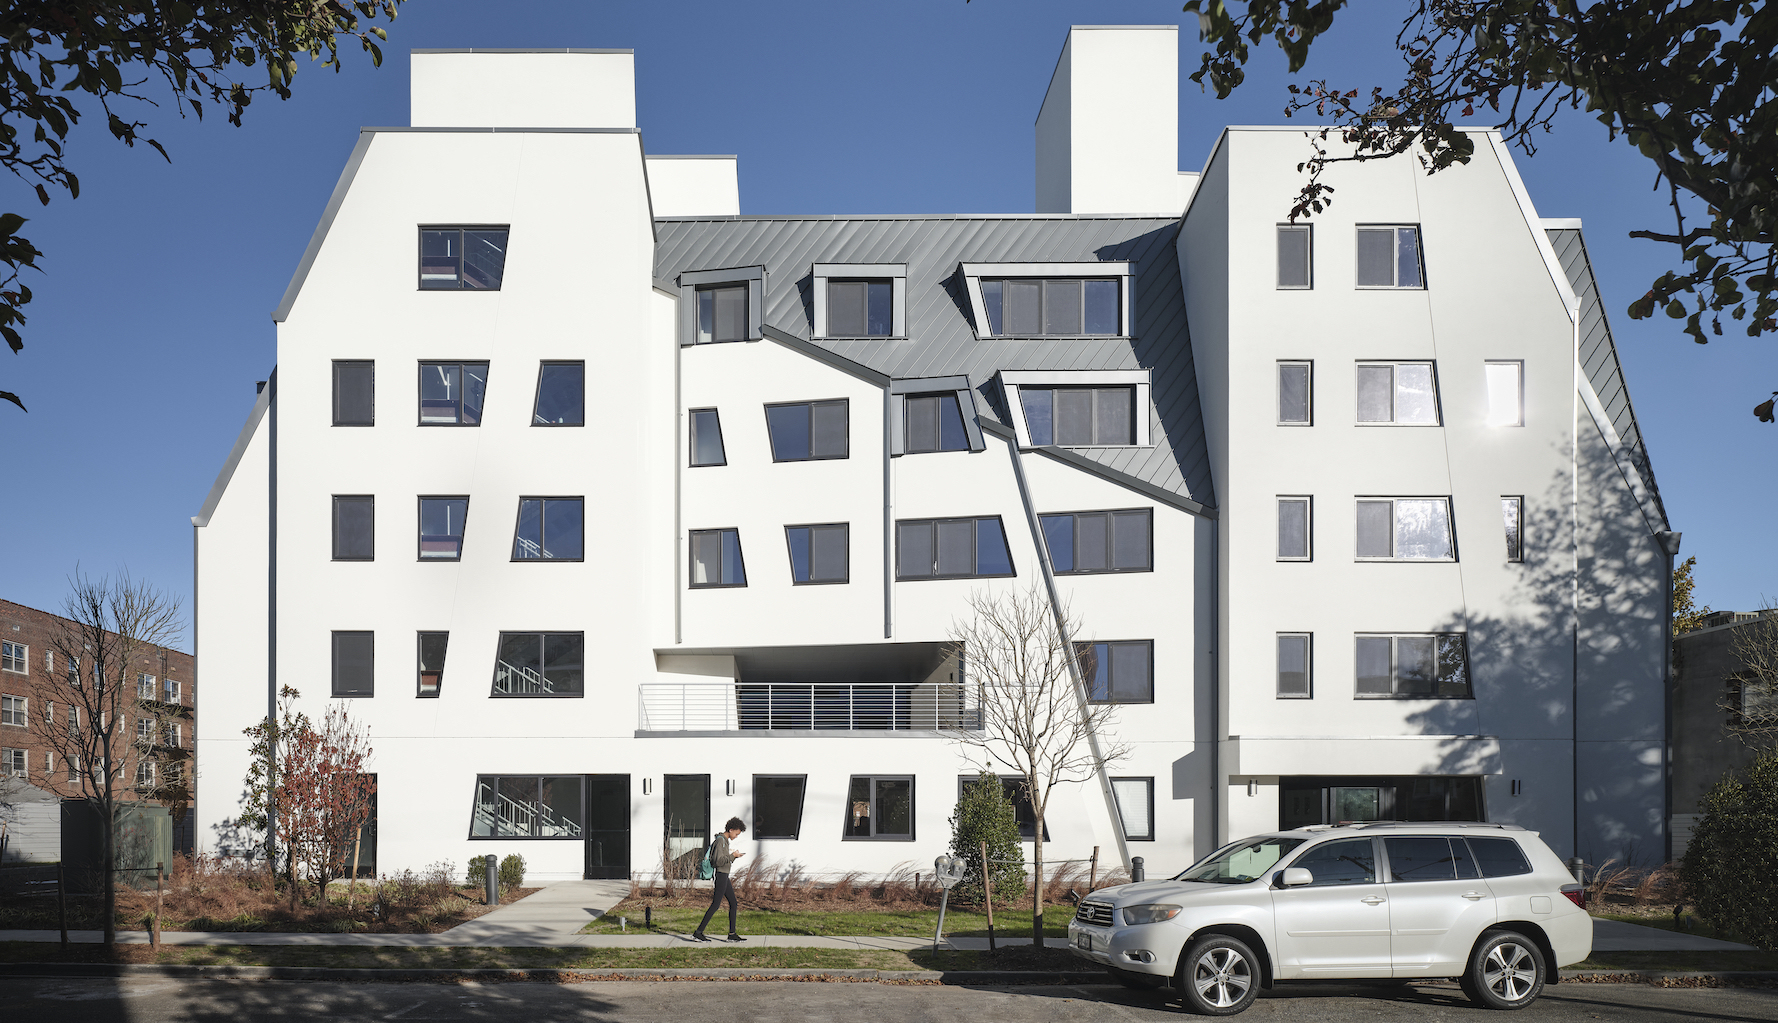 On Long Island, Studio Libeskind Delivers Supportive Housing With a Distinctive Facade